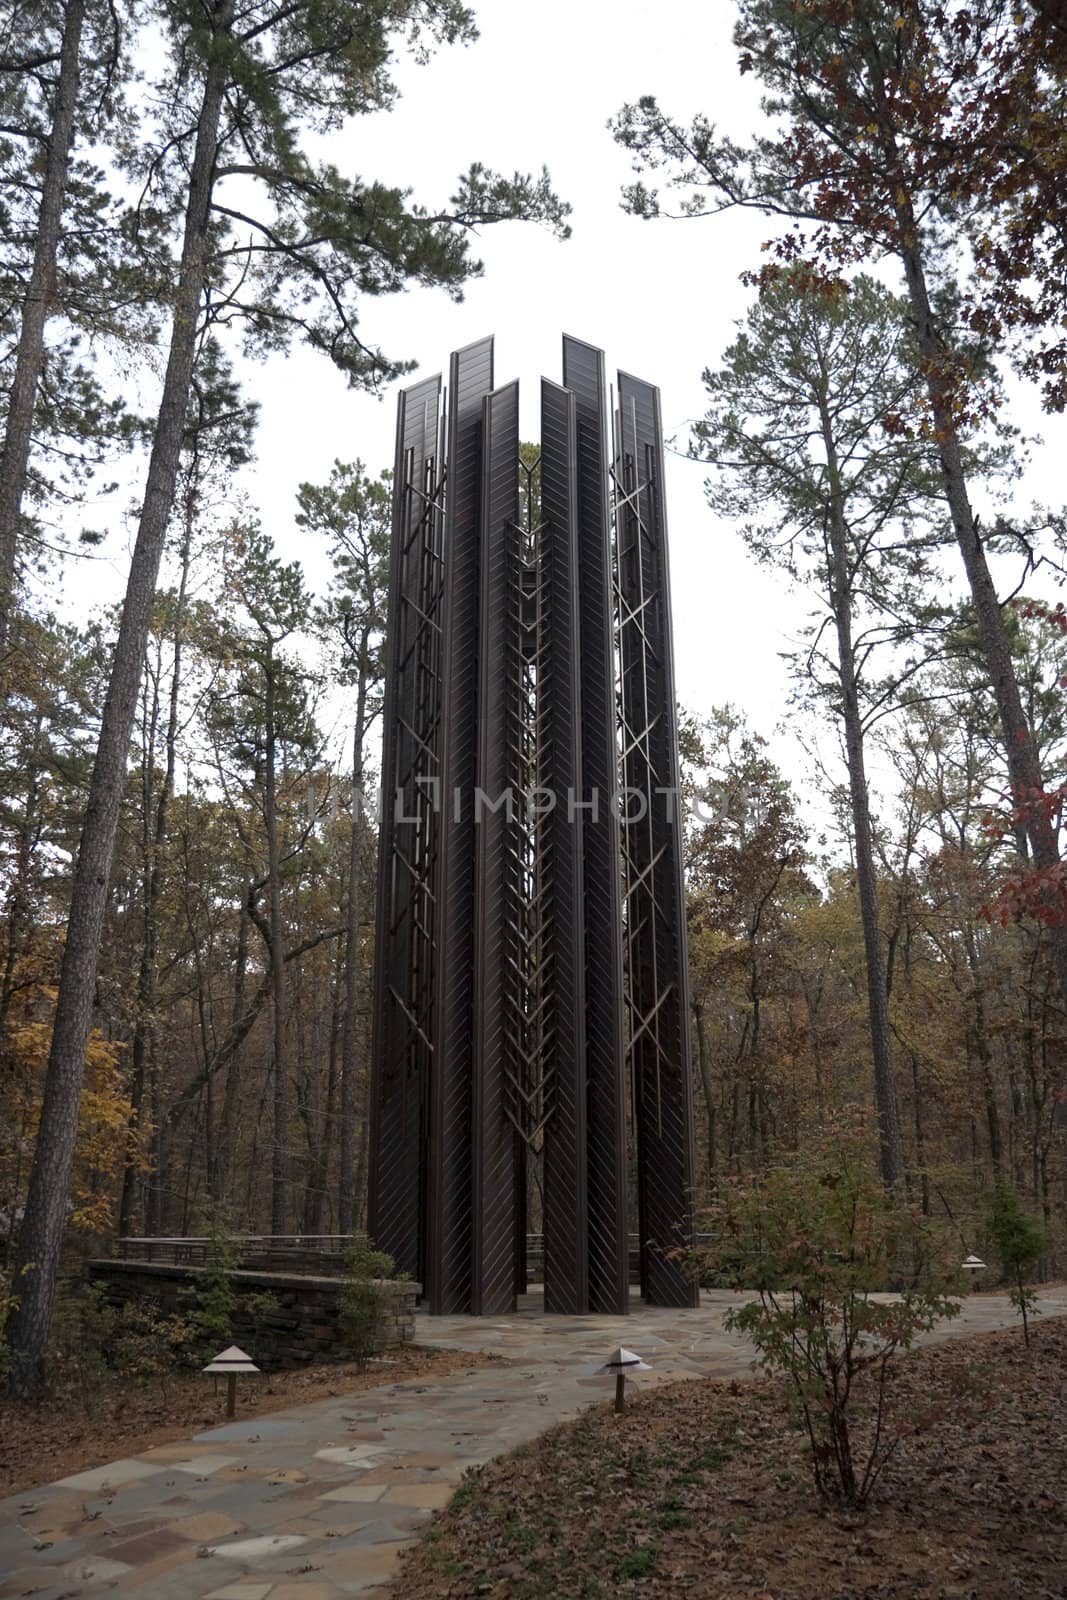 A lone contemporary metal tower lost in a forest